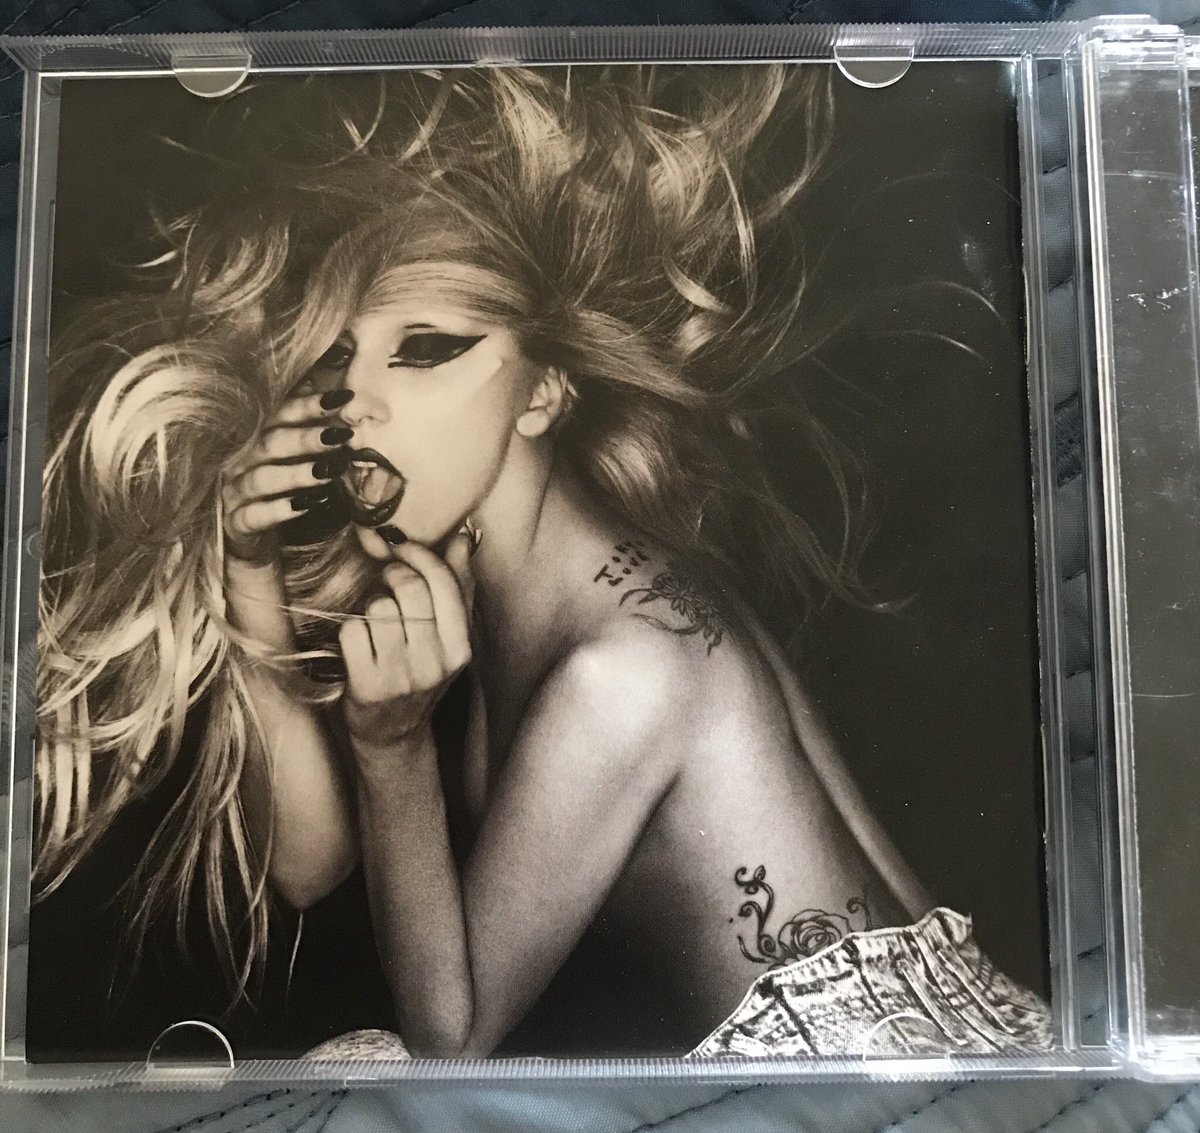 #3 : Born This Way by Lady Gaga. Need I say more? Iconic. Next question